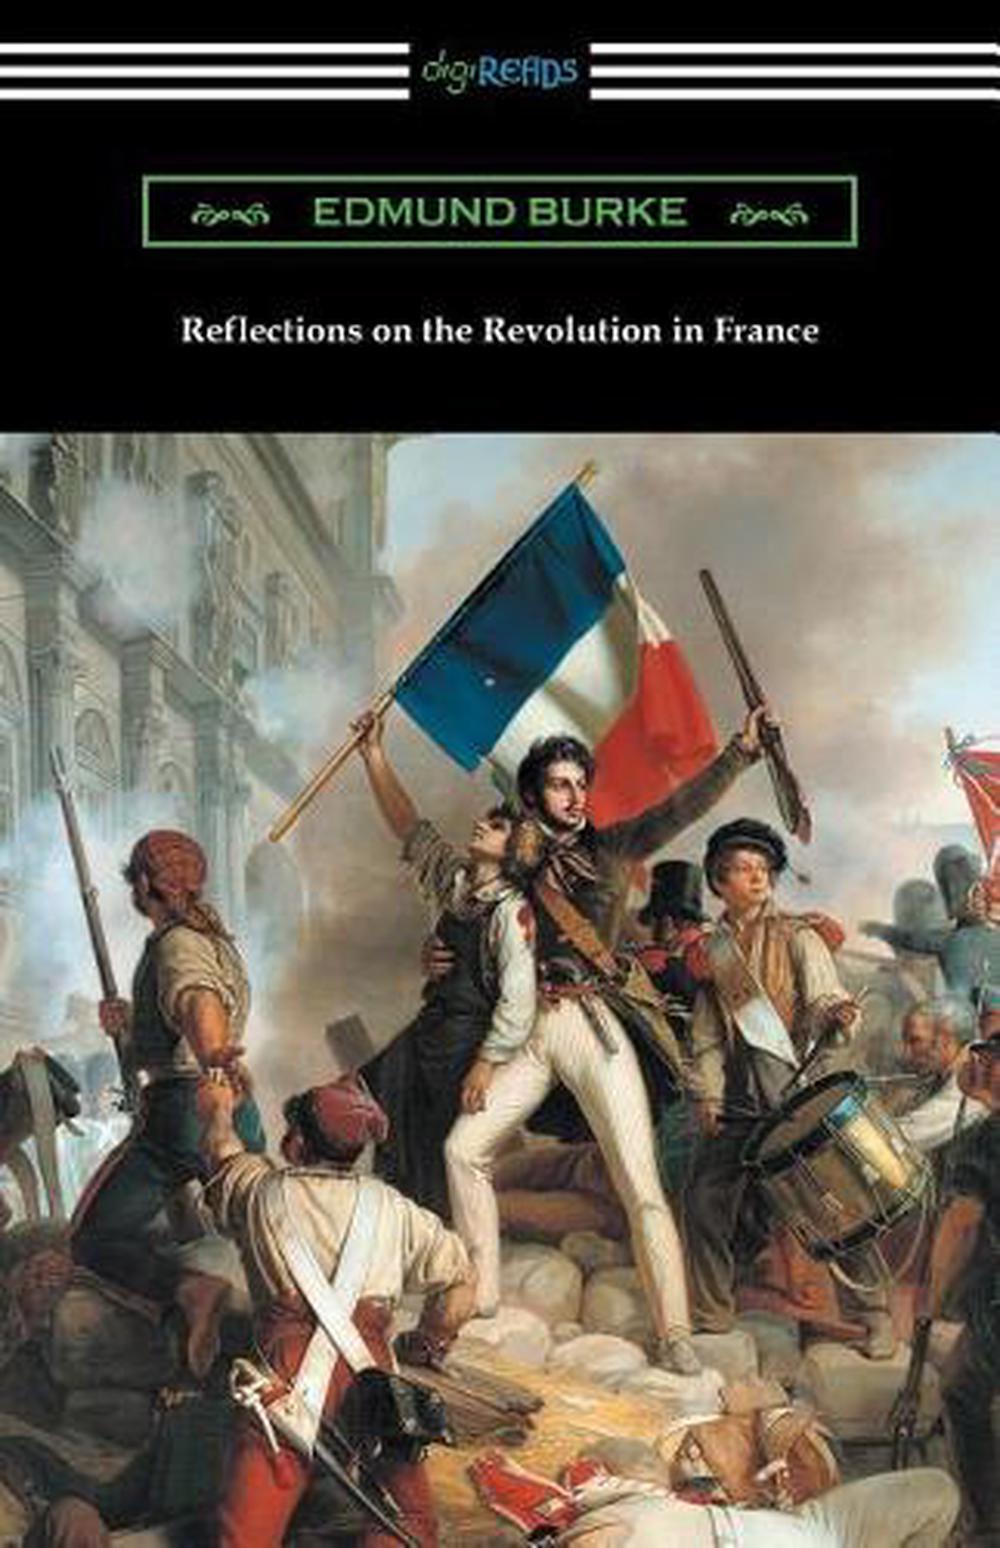 reflections on the revolution in france was written by